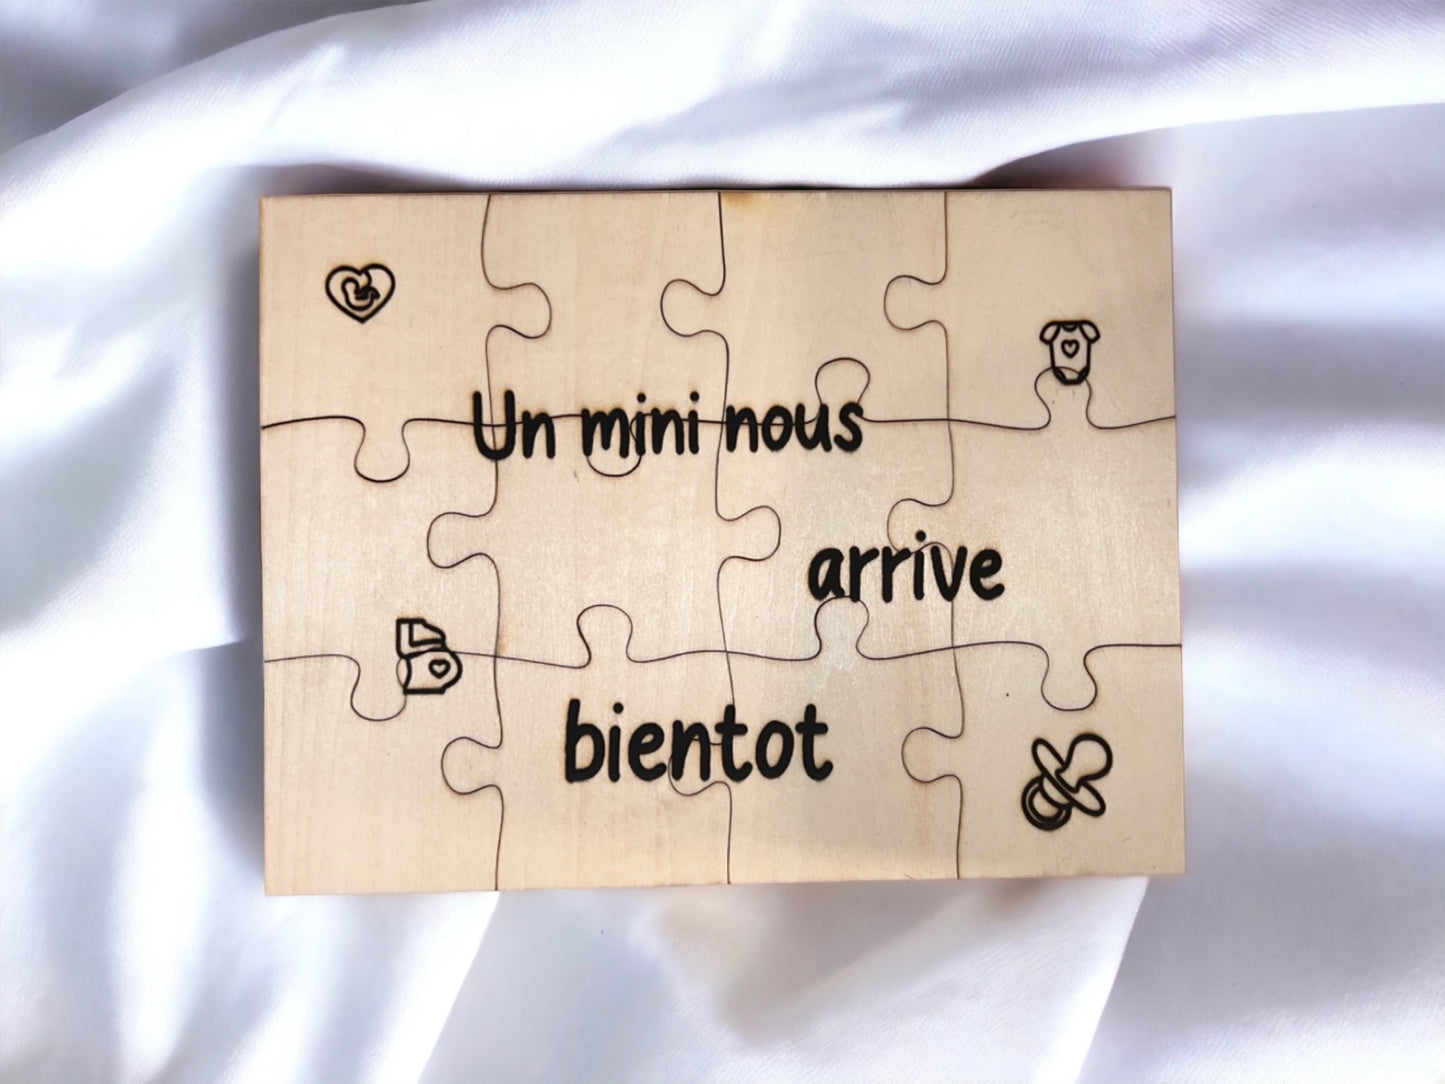 PUZZLE annonce GROSSESSE PAPY